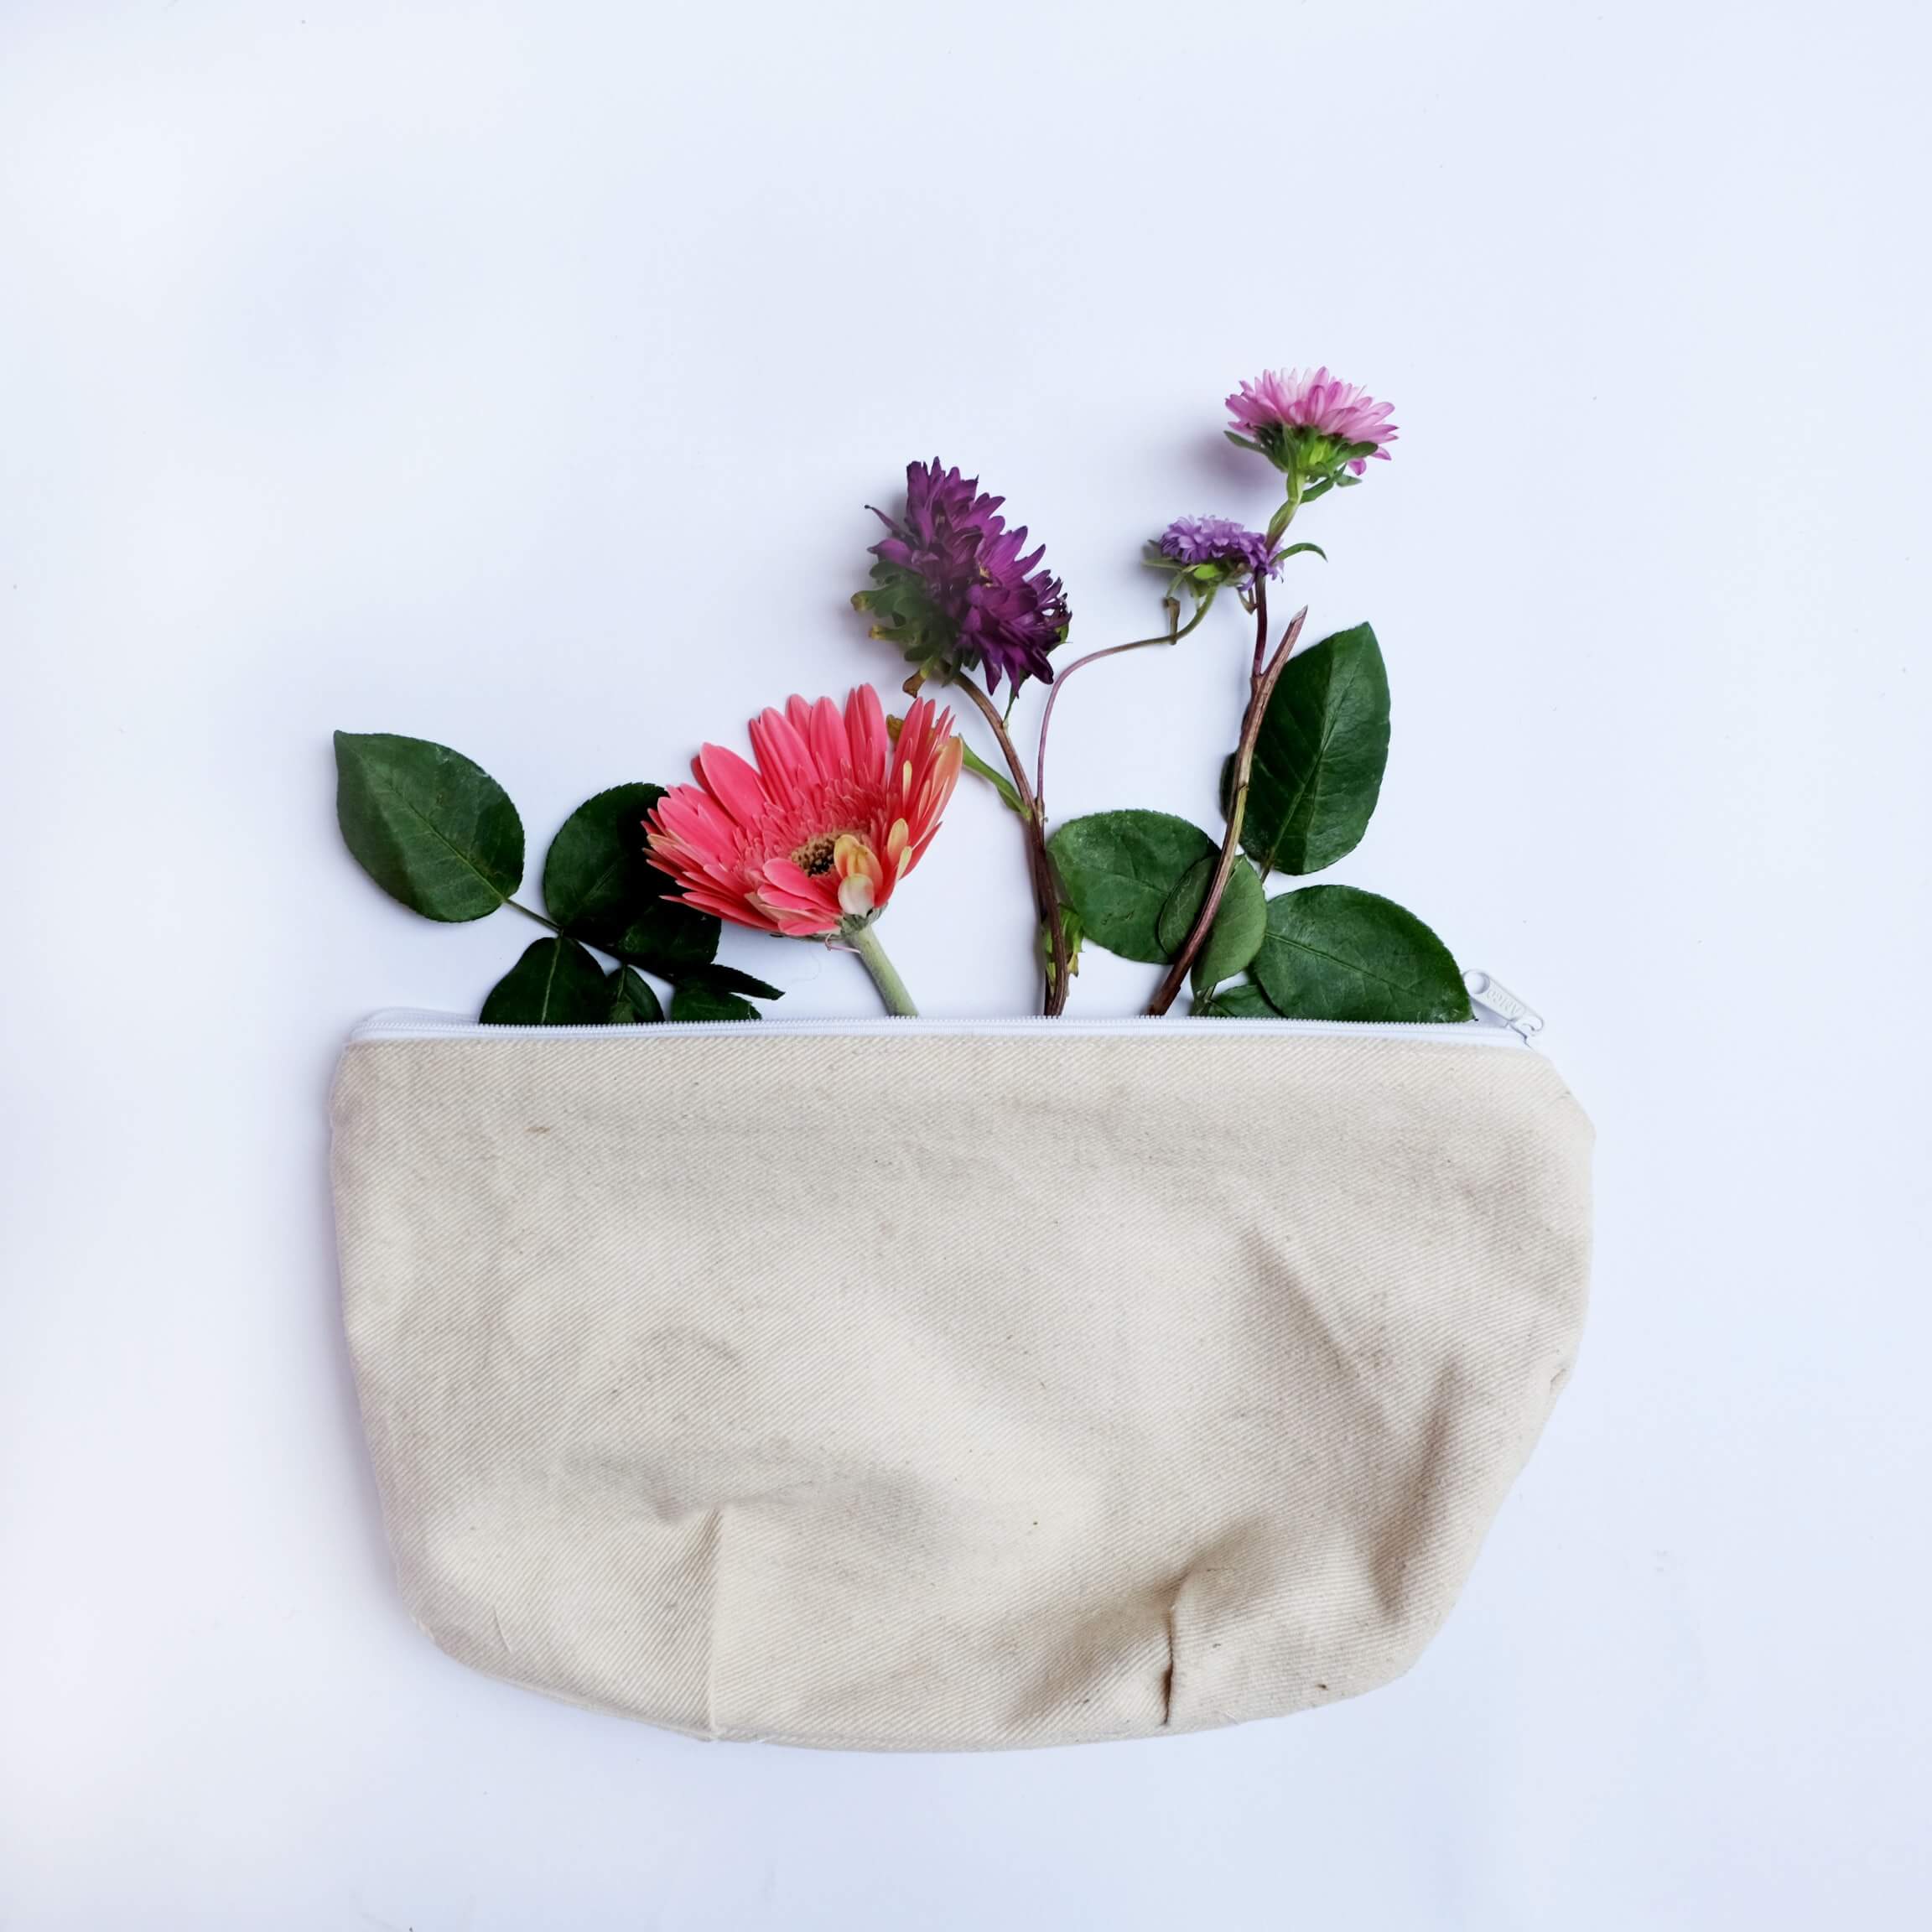 Spring flowers in a cream canvas bag for storage